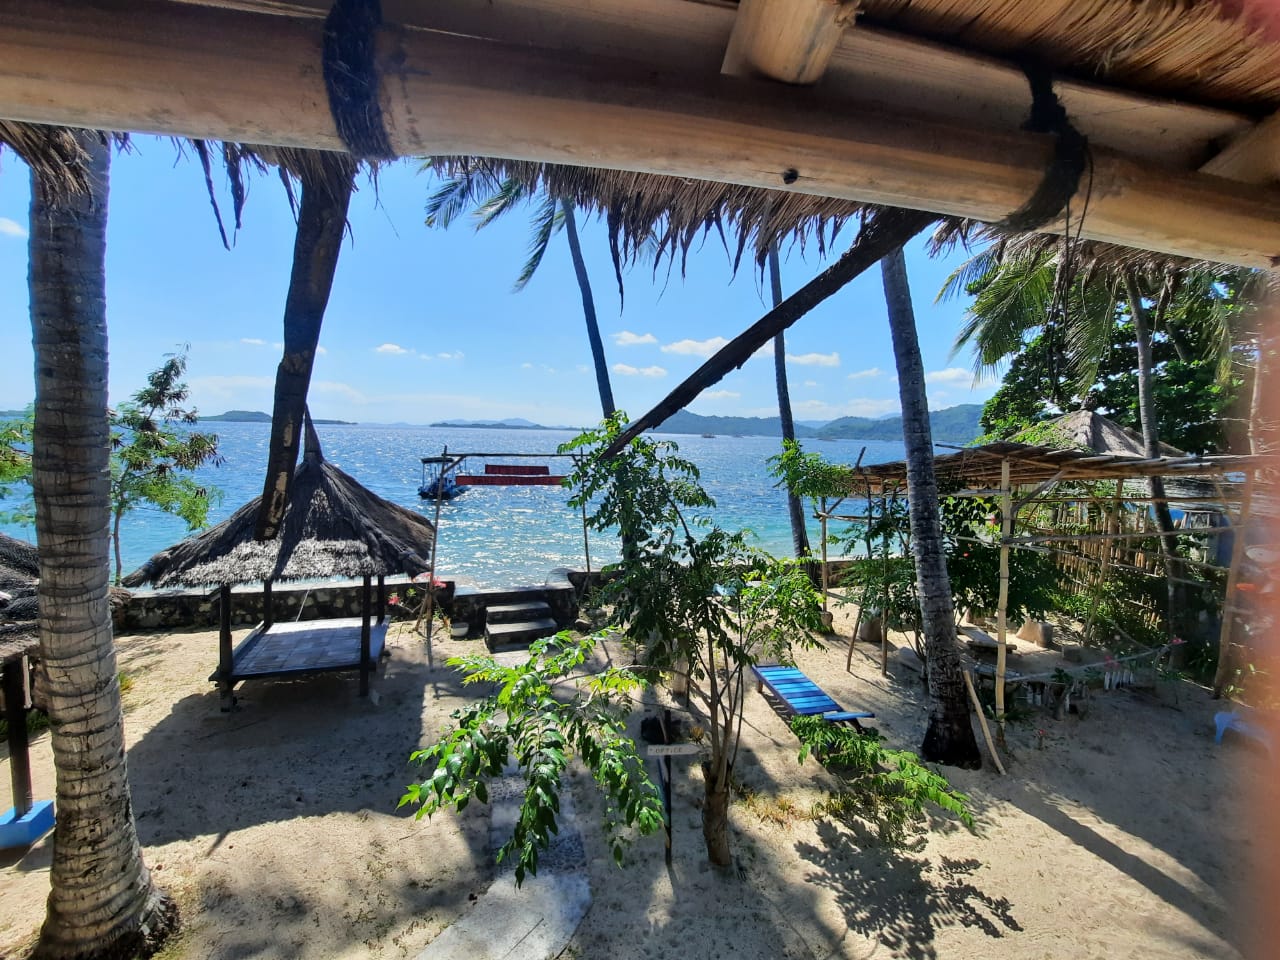 Dive Center For Sale - Company PMA, Dive center in prime location front BEACH LOMBOK, land, house (near BALI)